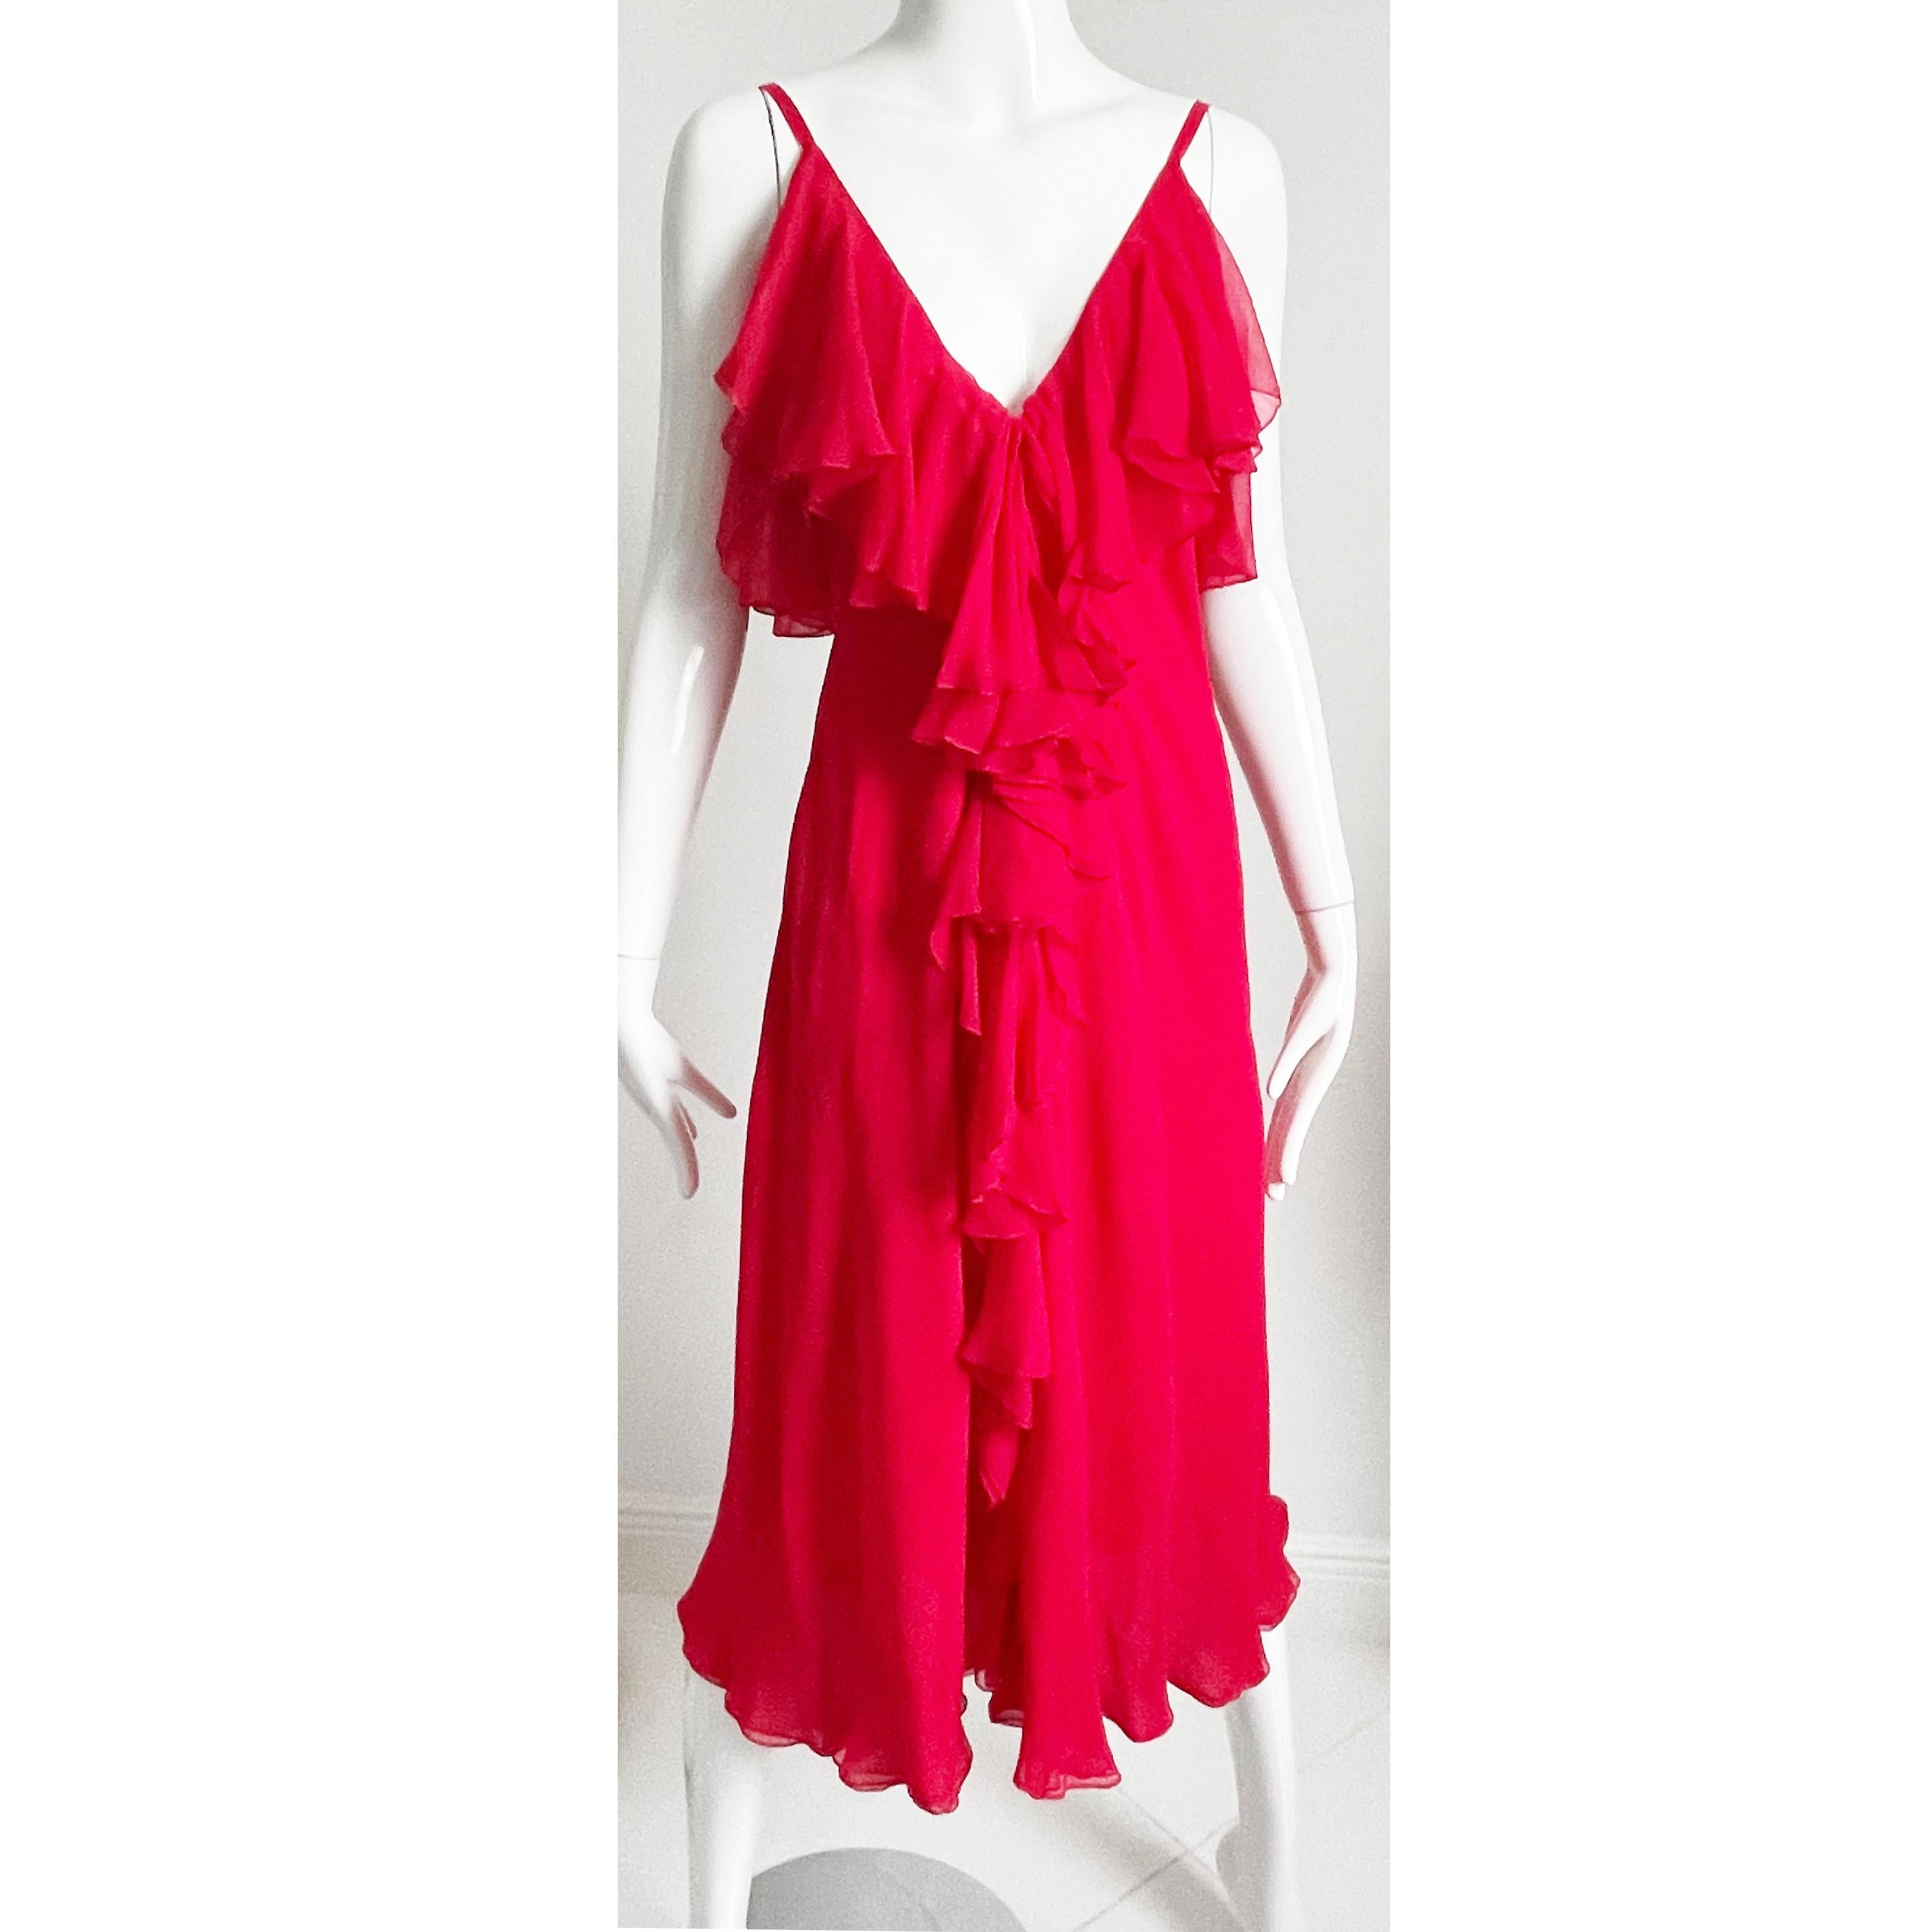 Pauline Trigere Dress and Shawl 2pc Set Red Silk Chiffon Loose Ruffles Vintage For Sale 4